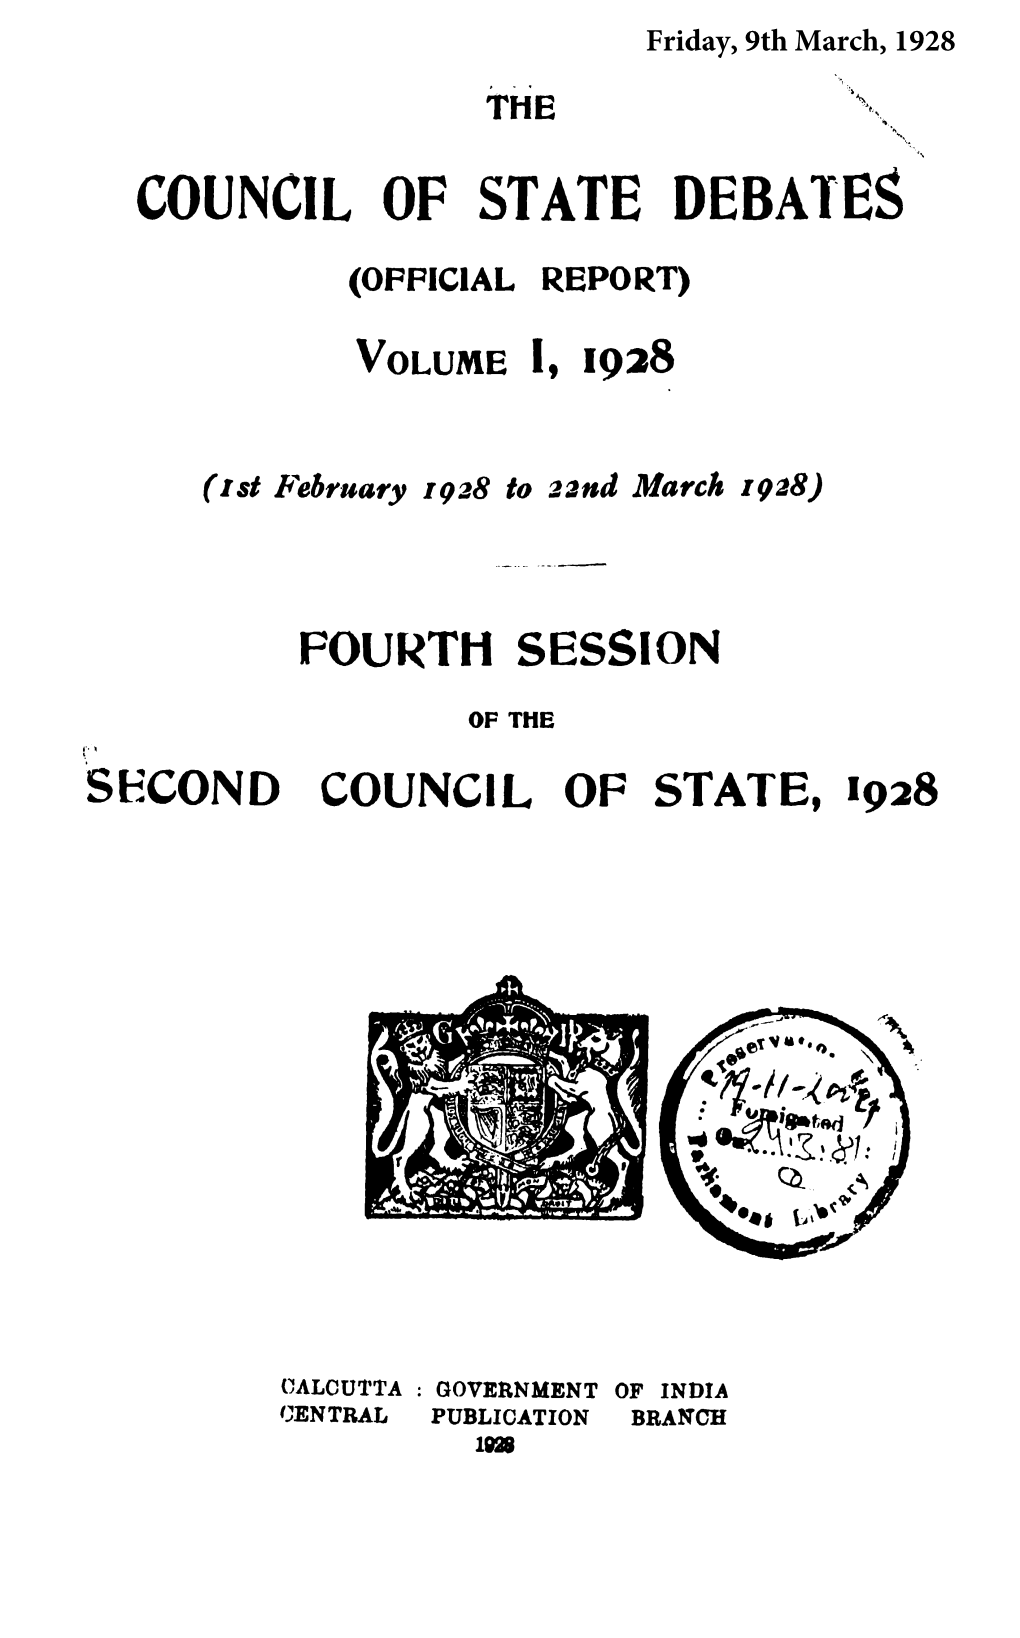 Council of State Debates (Opficial Report)